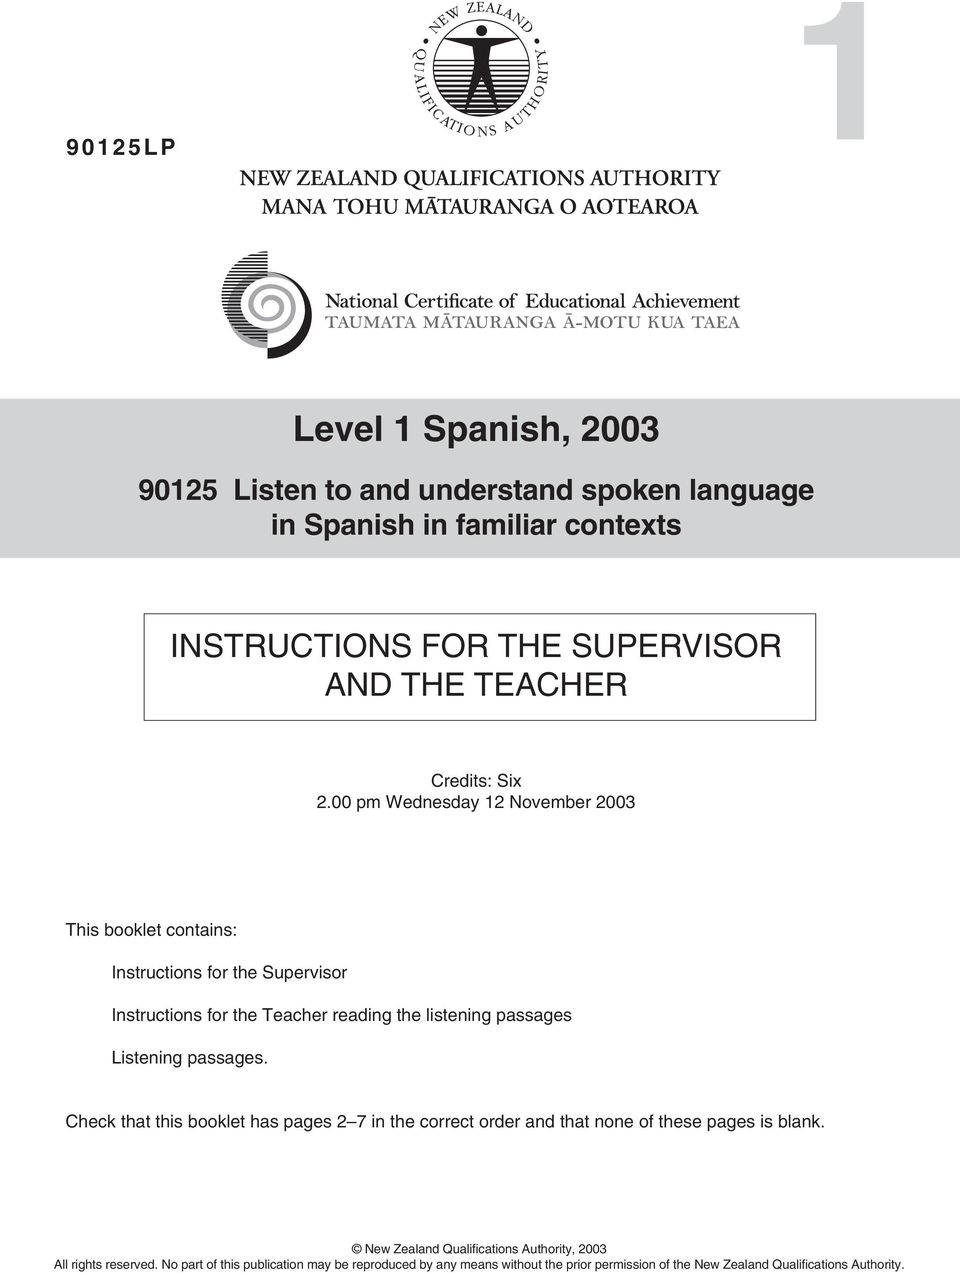 00 pm Wednesday 12 November 2003 This booklet contains: Instructions for the Supervisor Instructions for the Teacher reading the listening passages Listening